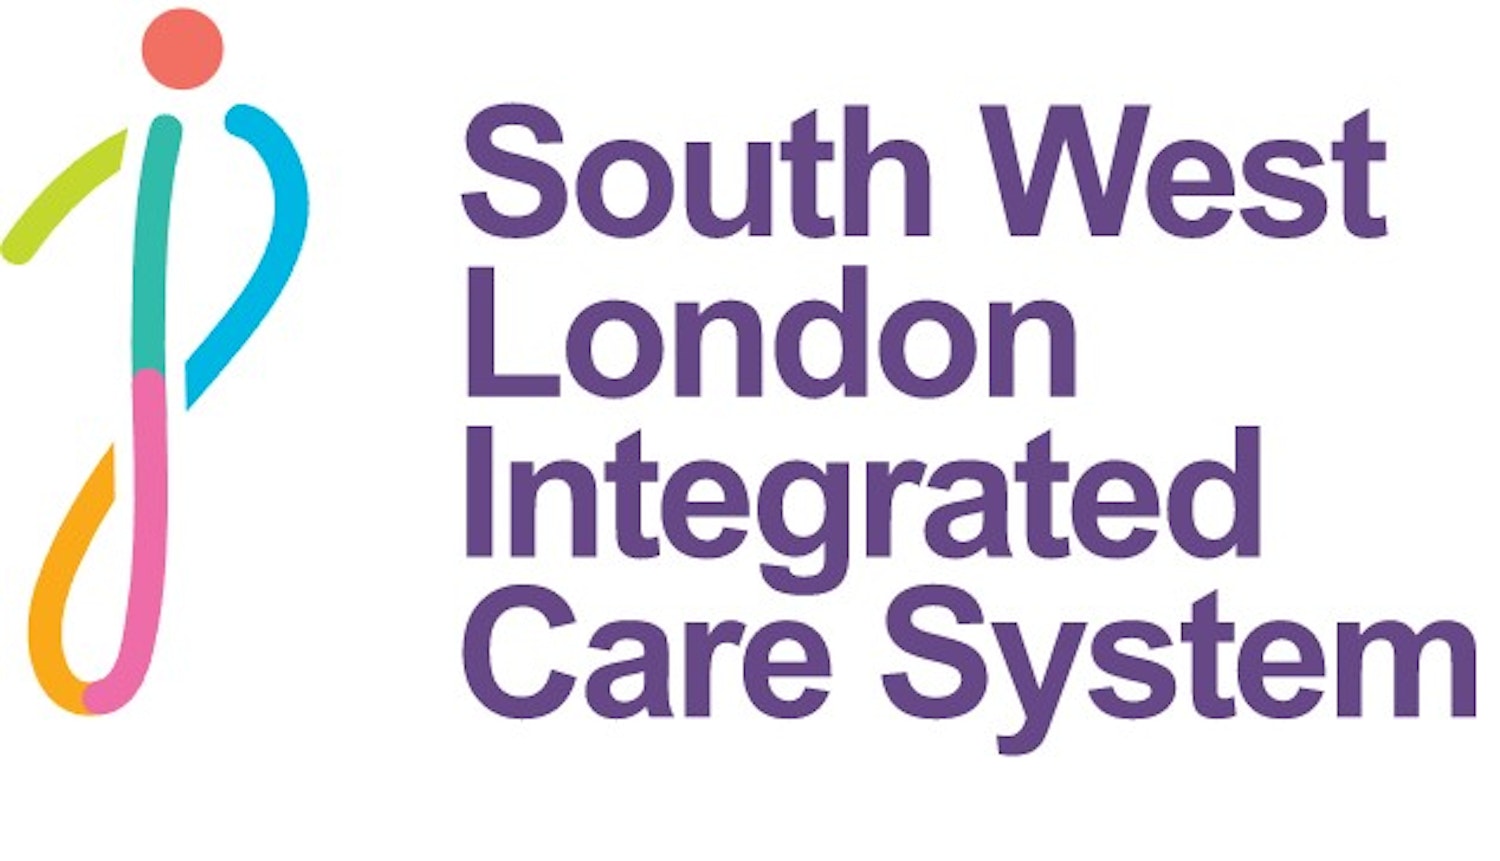 NHS South West London - Share your views 